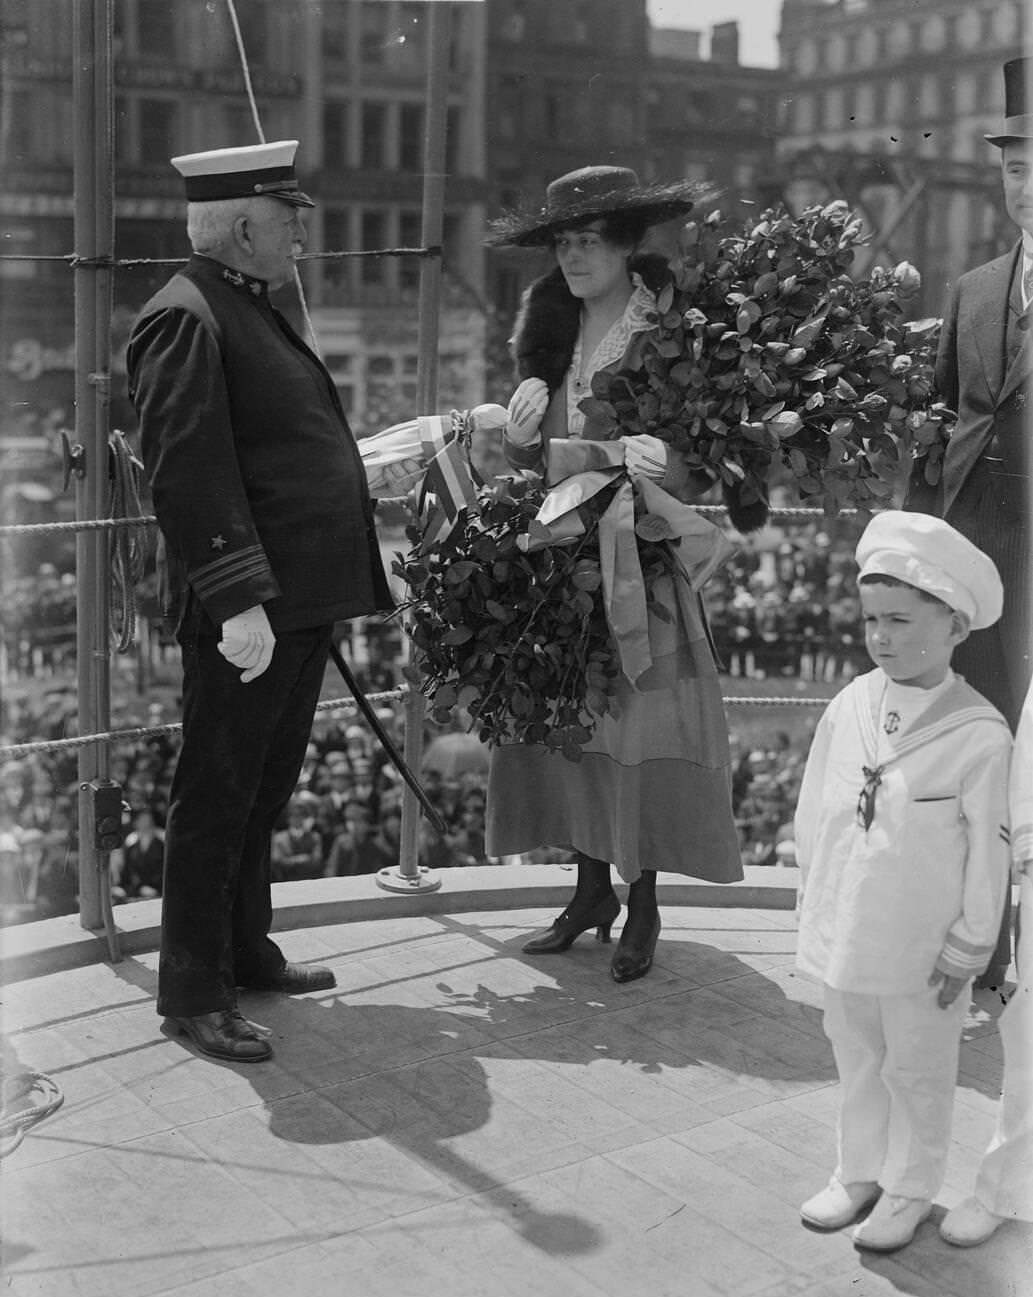 Captain Charles Albert Adams With Mrs. Olive Mitchel, Wife Of New York Mayor John Purroy Mitchel, And A Child, Jack Adams. The Photograph Was Taken On Memorial Day, 1917, The Day Of The &Amp;Quot;Launch&Amp;Quot; Of The Ship.